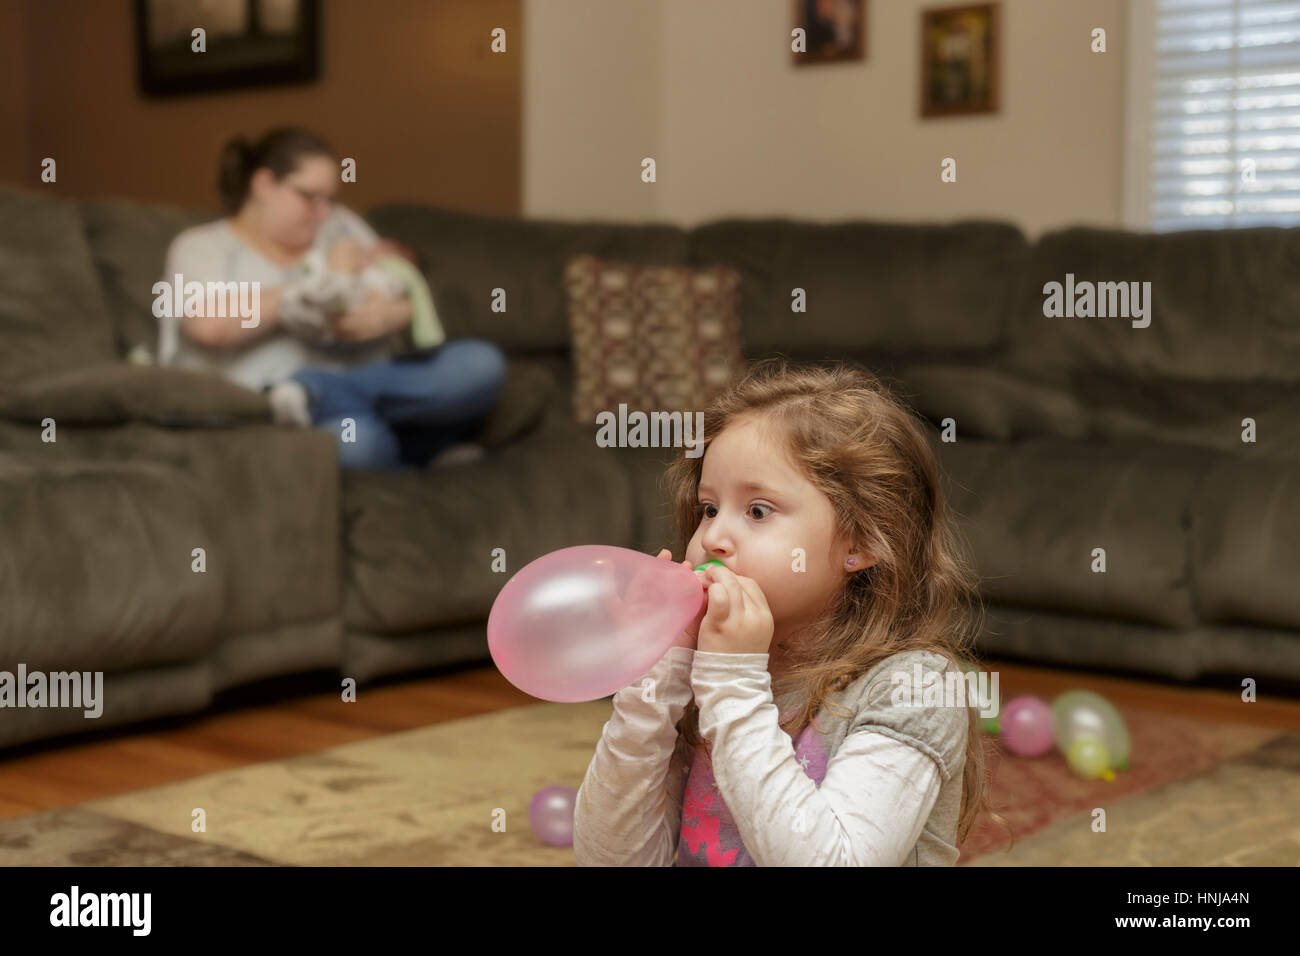 girl blowing up a balloon with mother in the background Stock Photo